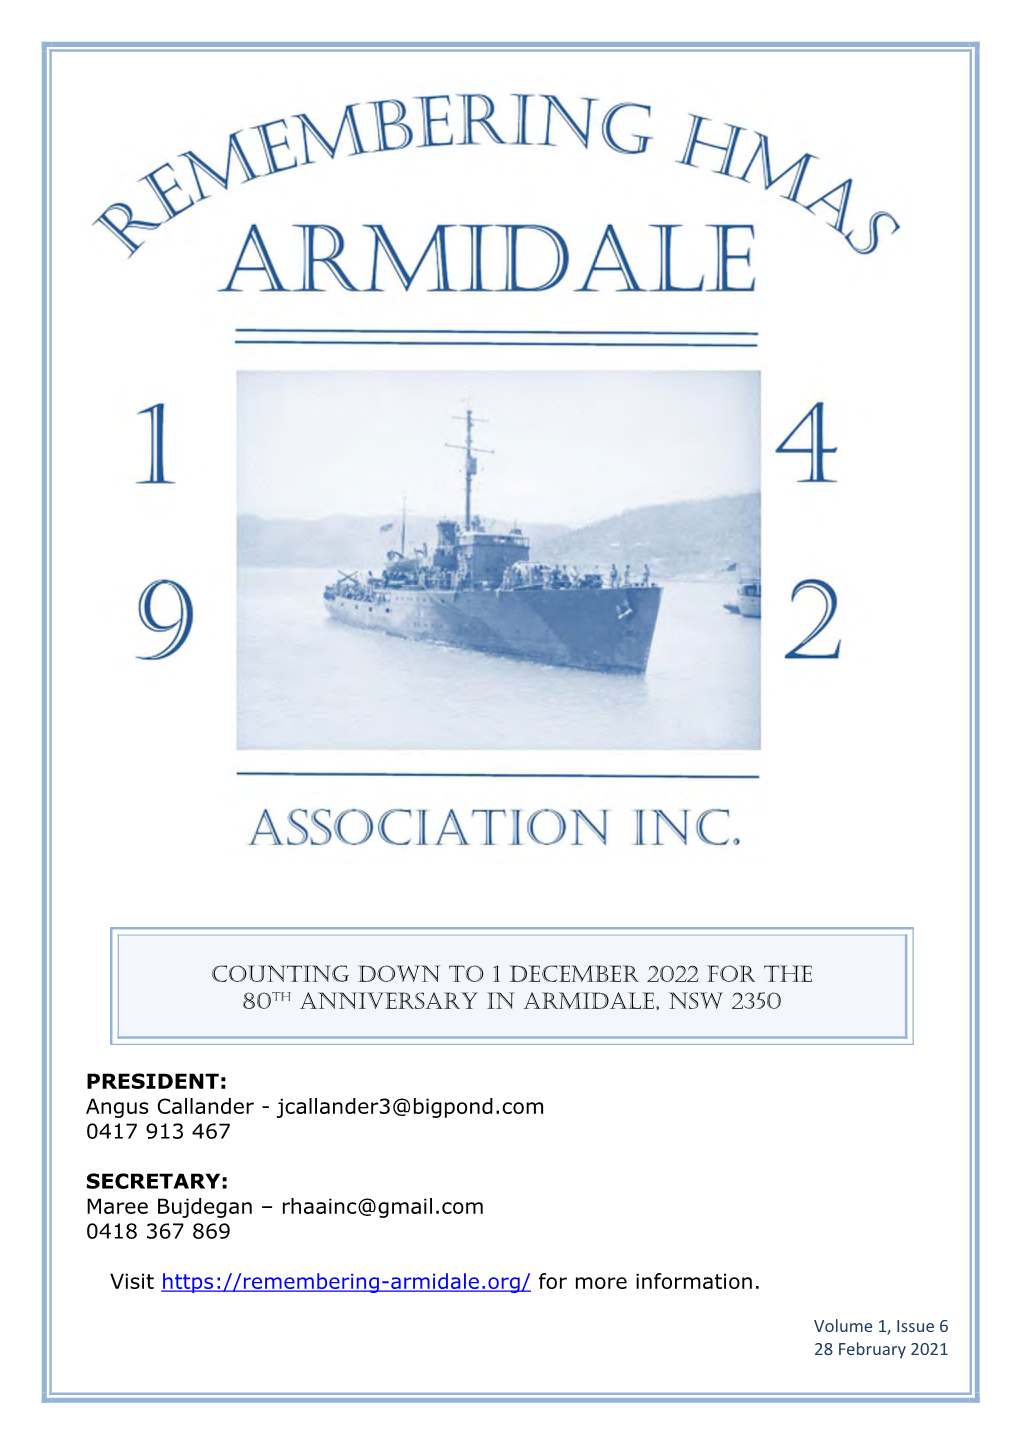 Counting Down to 1 December 2022 for the 80Th Anniversary in Armidale, NSW 2350